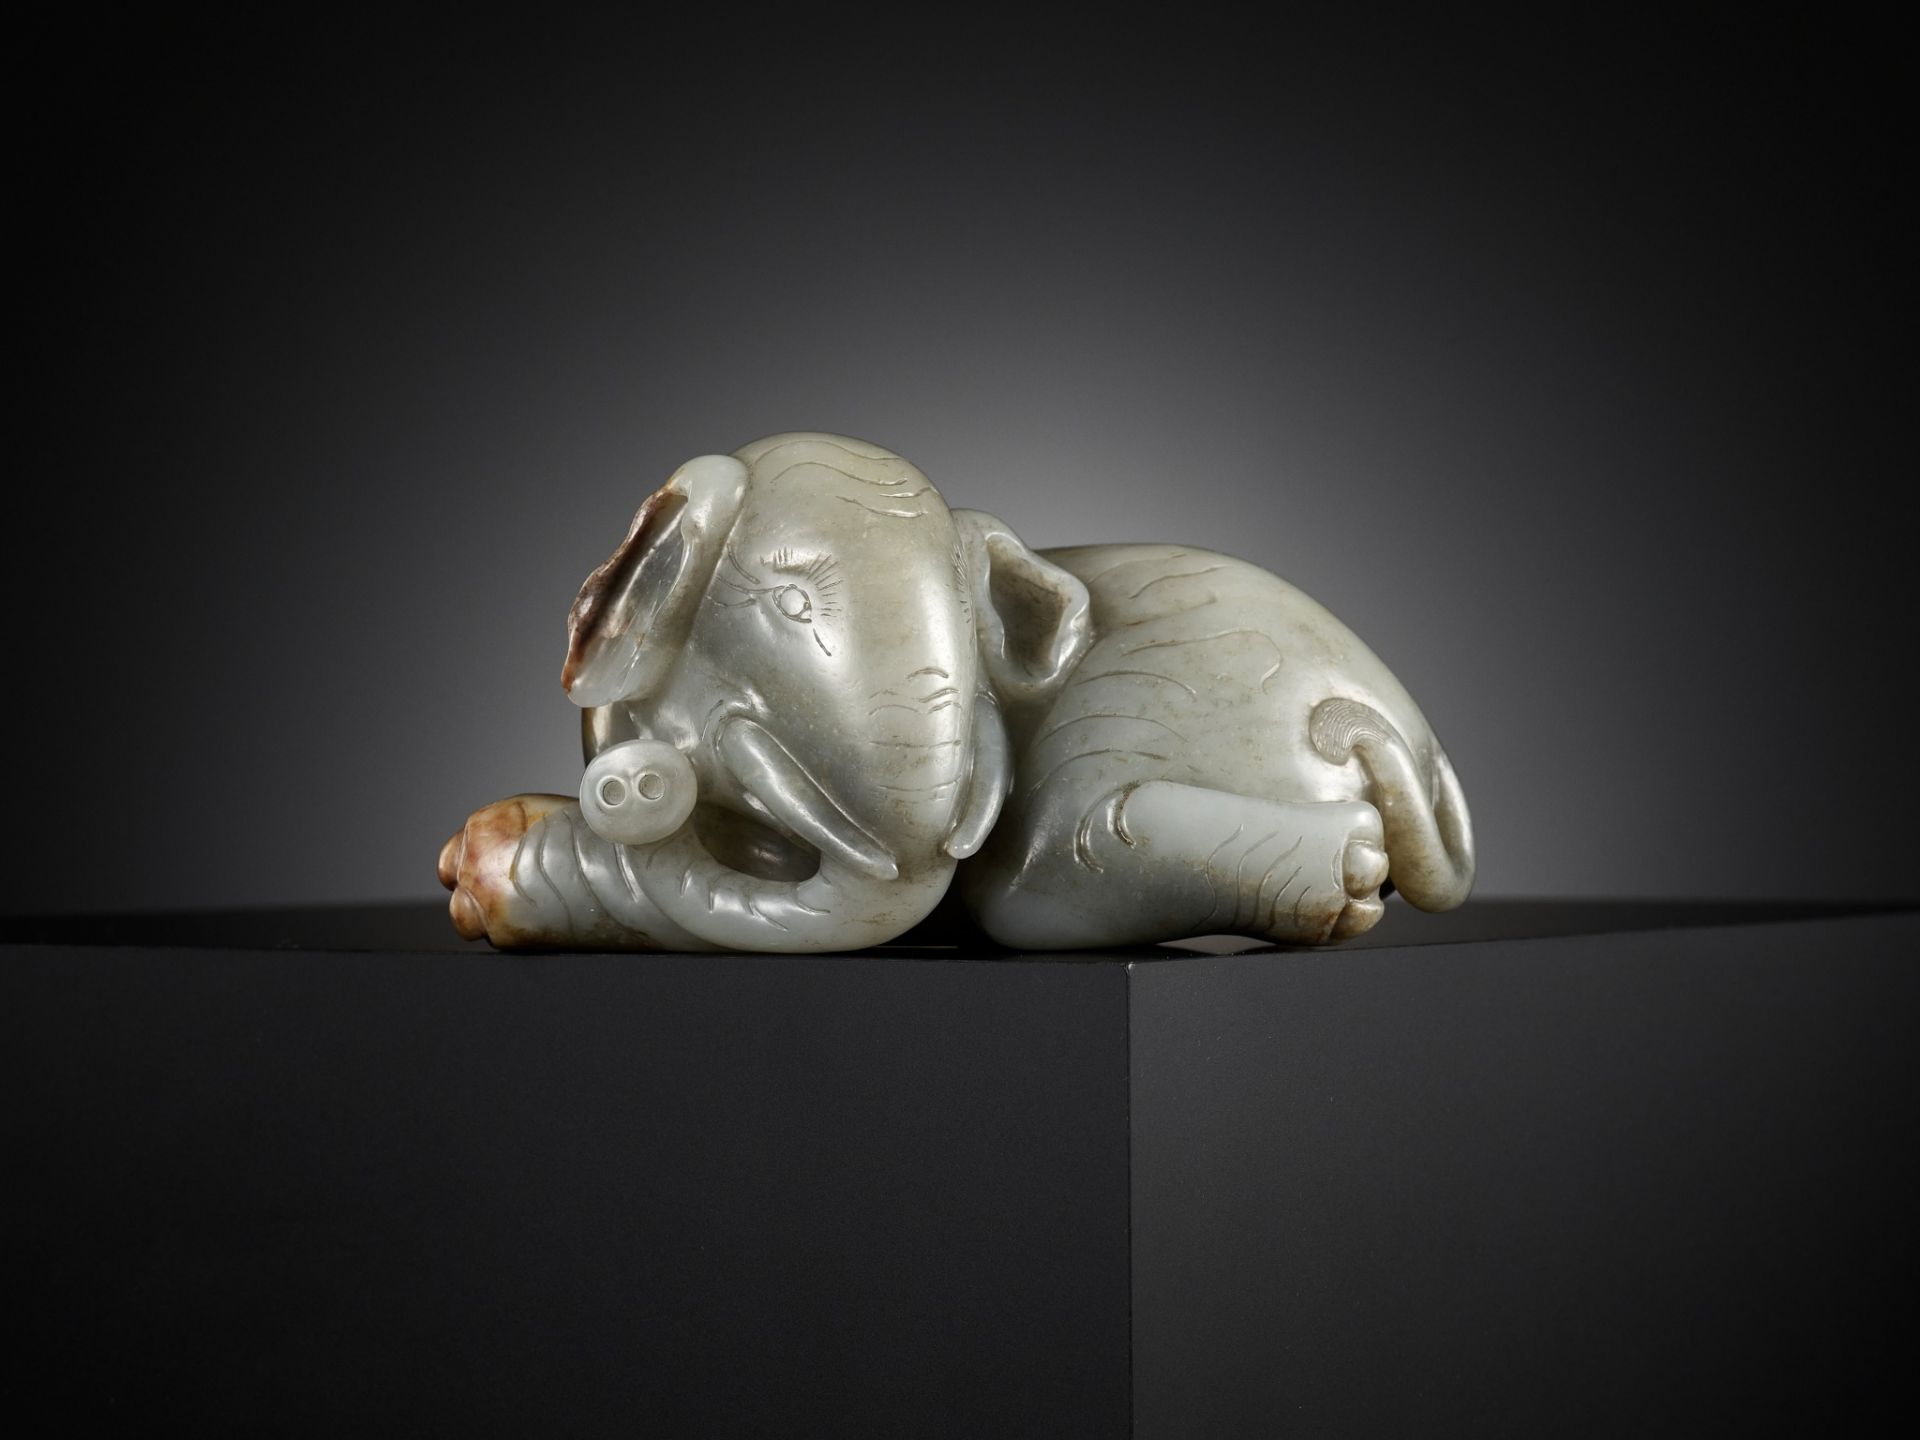 A GRAY AND RUSSET JADE FIGURE OF A RECUMBENT ELEPHANT, LATE MING TO MID-QING DYNASTY - Image 9 of 15